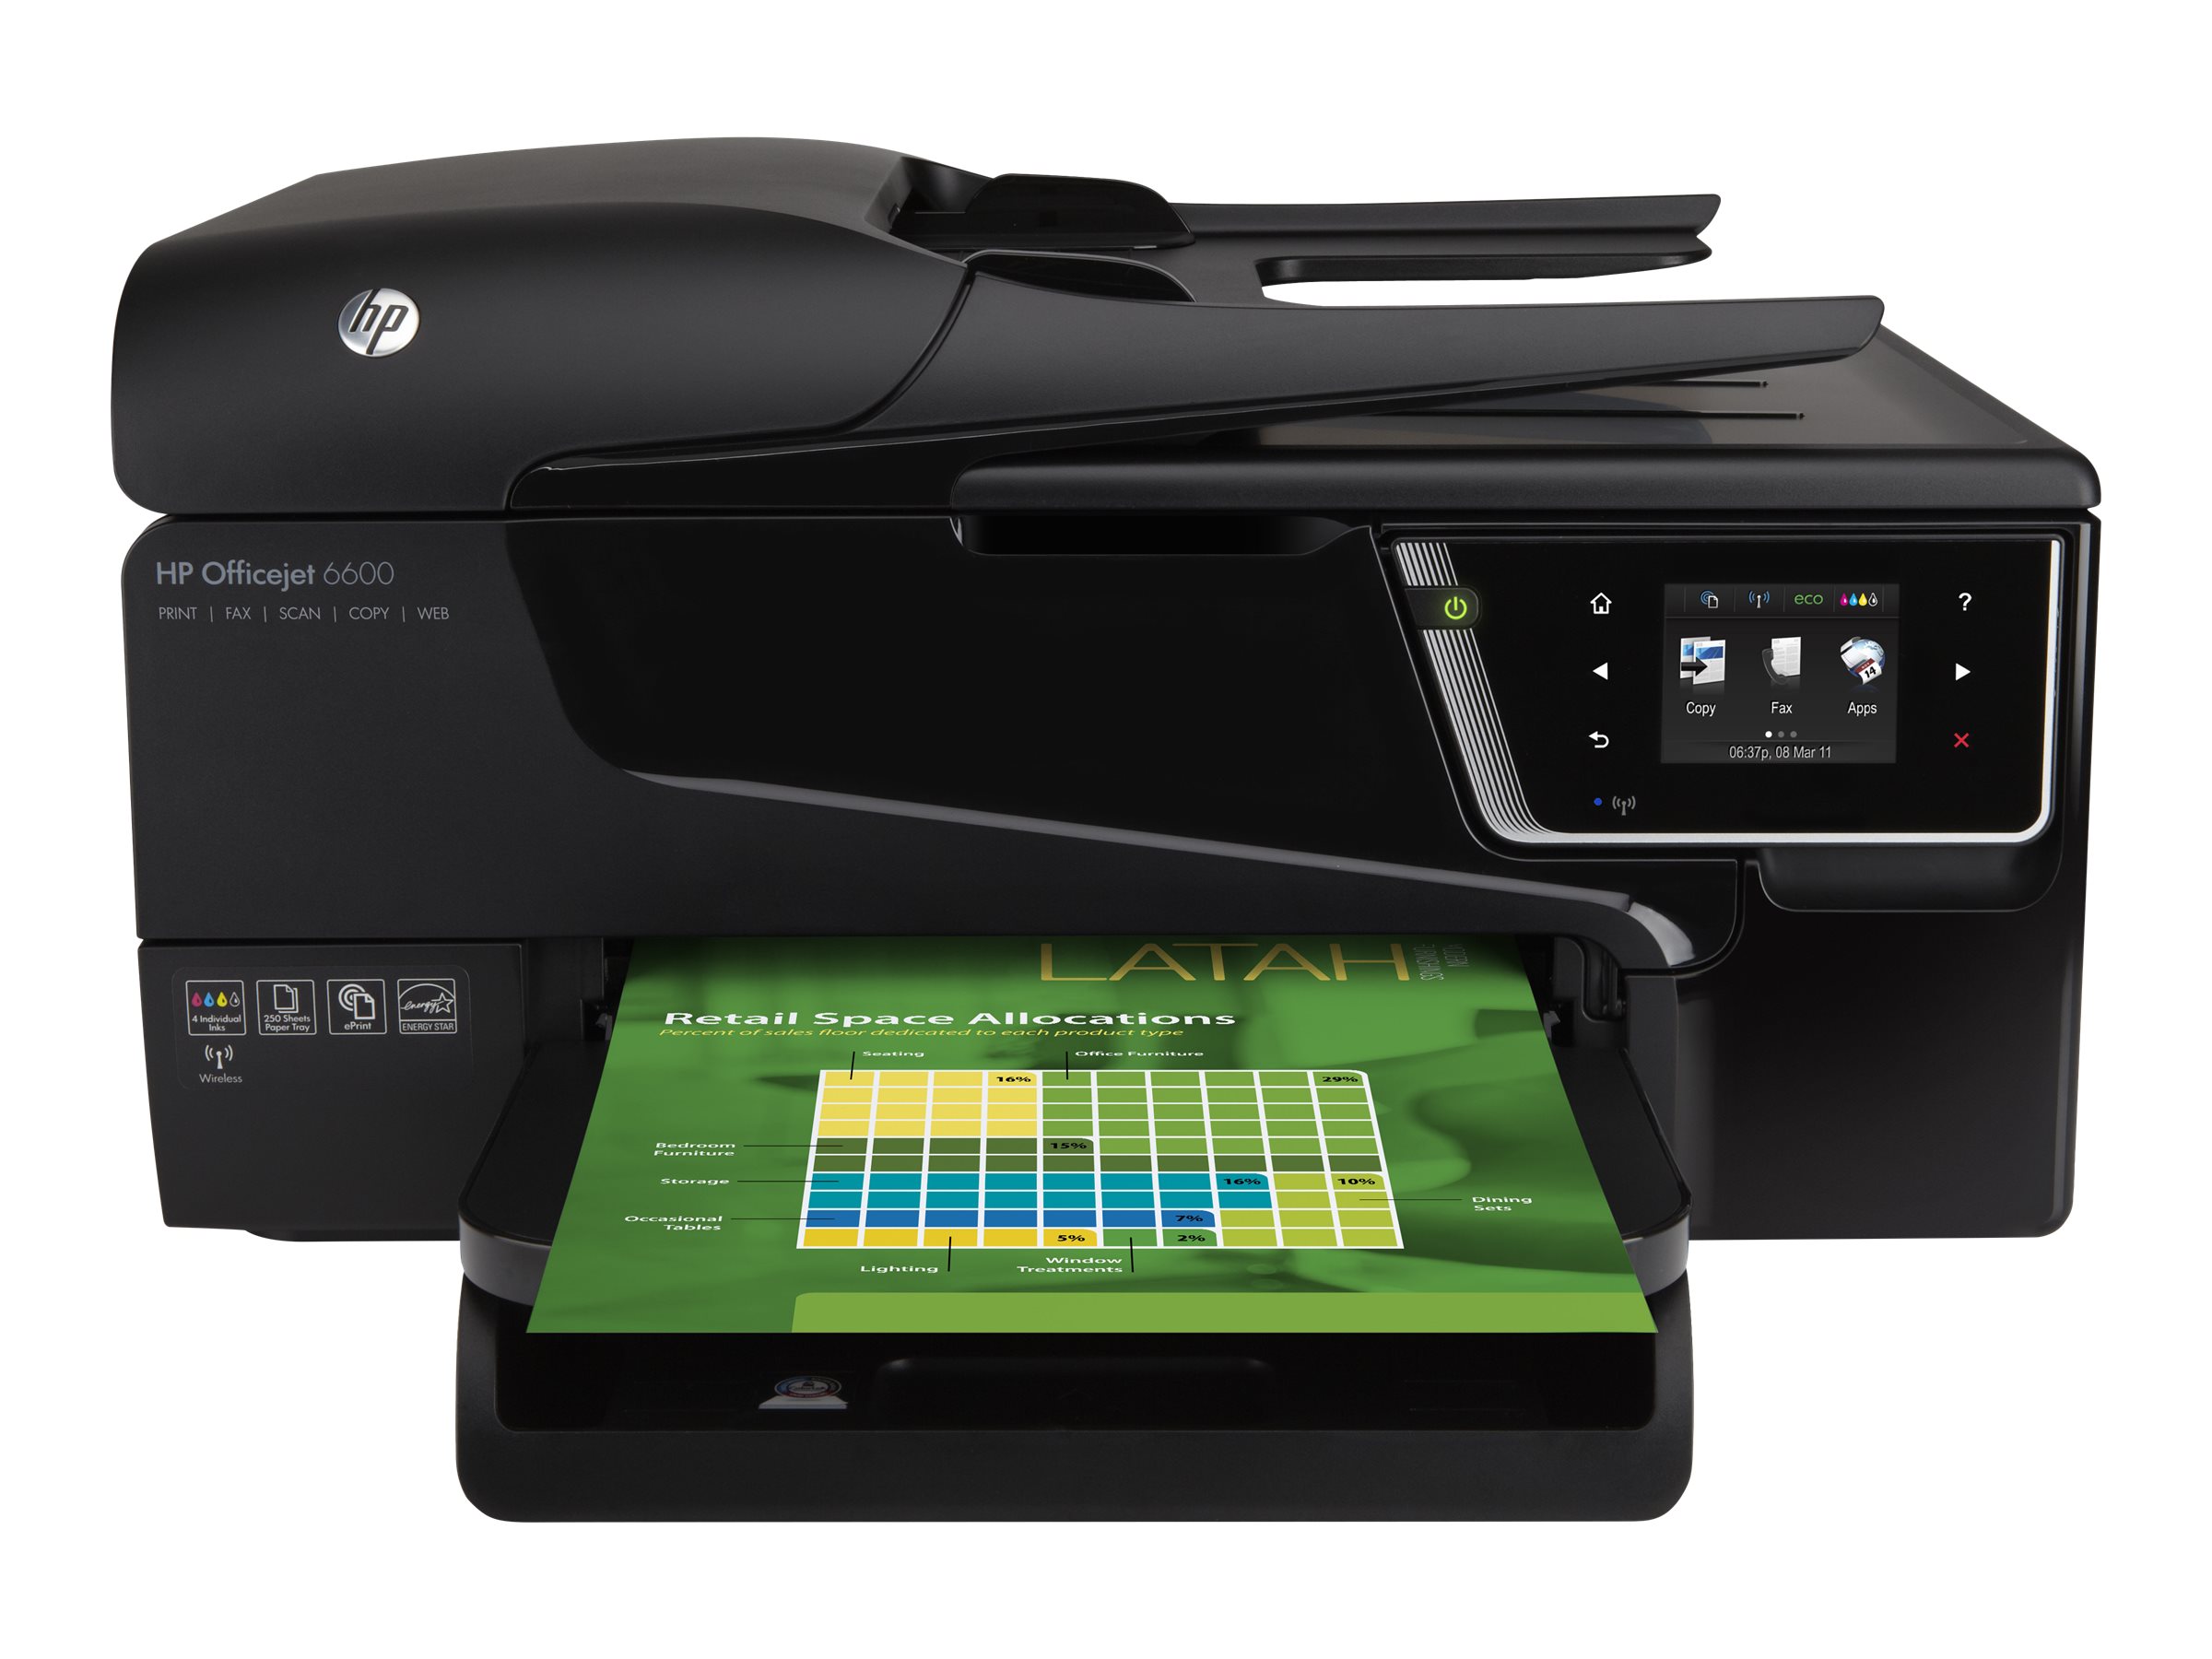 HP Officejet 6600 e-All-in-One H711a - Multifunction printer - color - ink-jet - Legal (8.5 in x 14 in)/A4 (8.25 in x 11.7 in) (original) - Legal (media) - up to 32 ppm (copying) - up to 14 ppm (printing) - 250 sheets - 33.6 Kbps - USB 2.0, Wi-Fi(n) - image 3 of 8